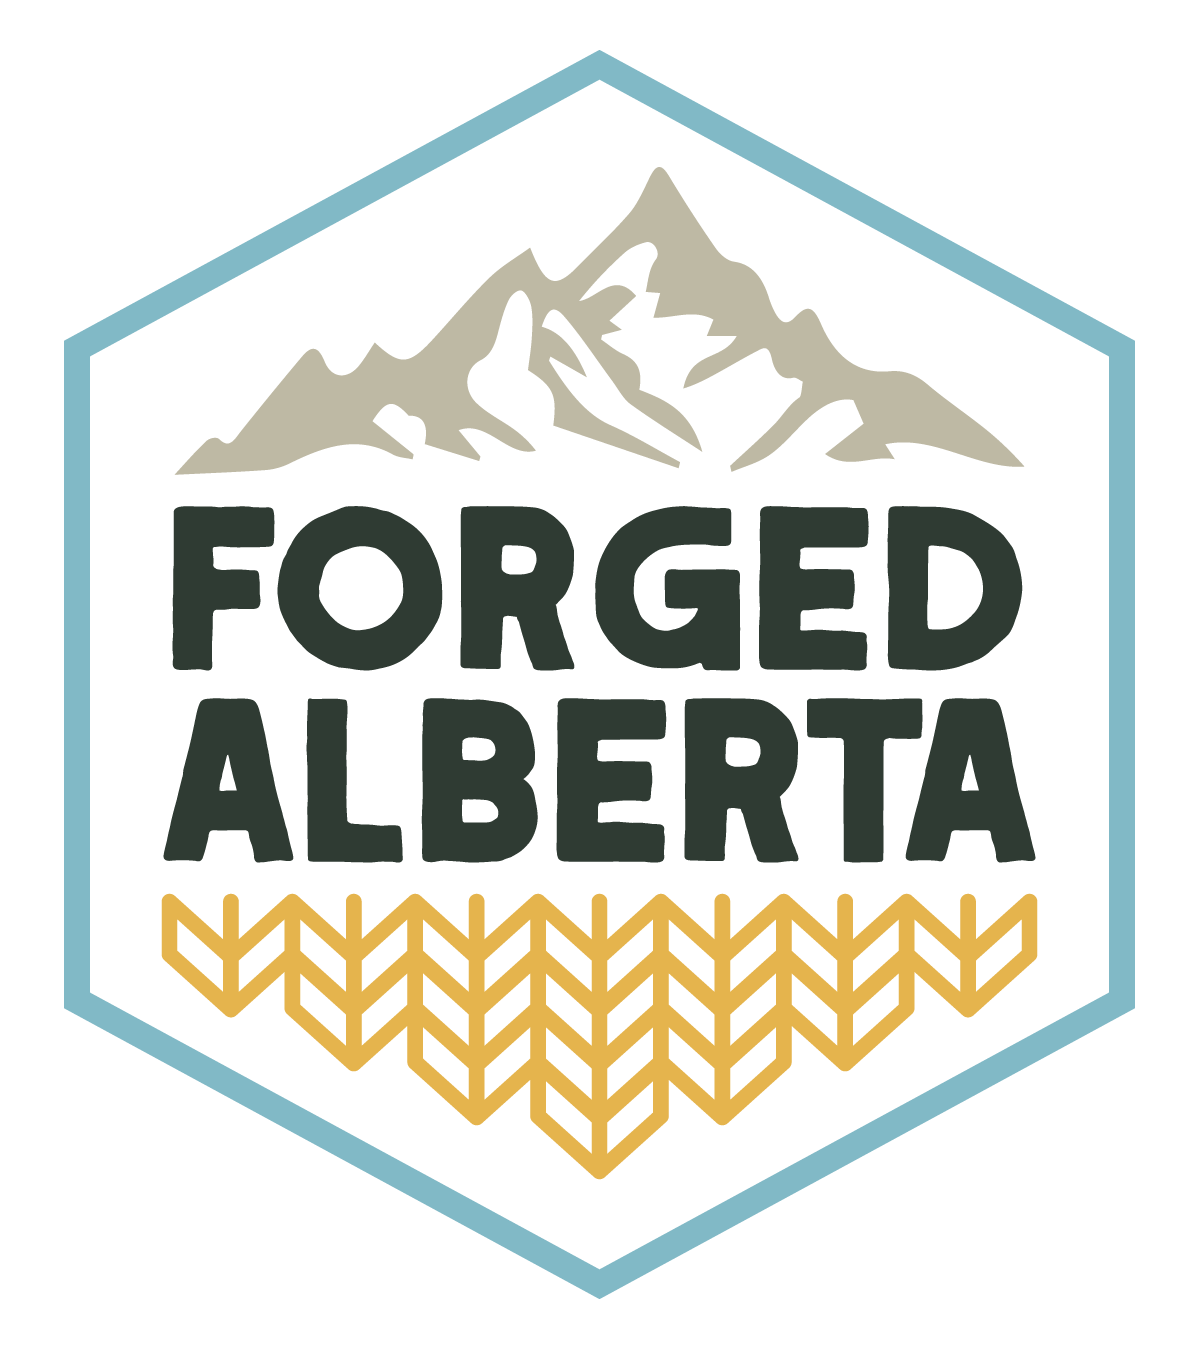 The logo for the Forged Alberta store at Heritage Park. Features mountains and wheat.